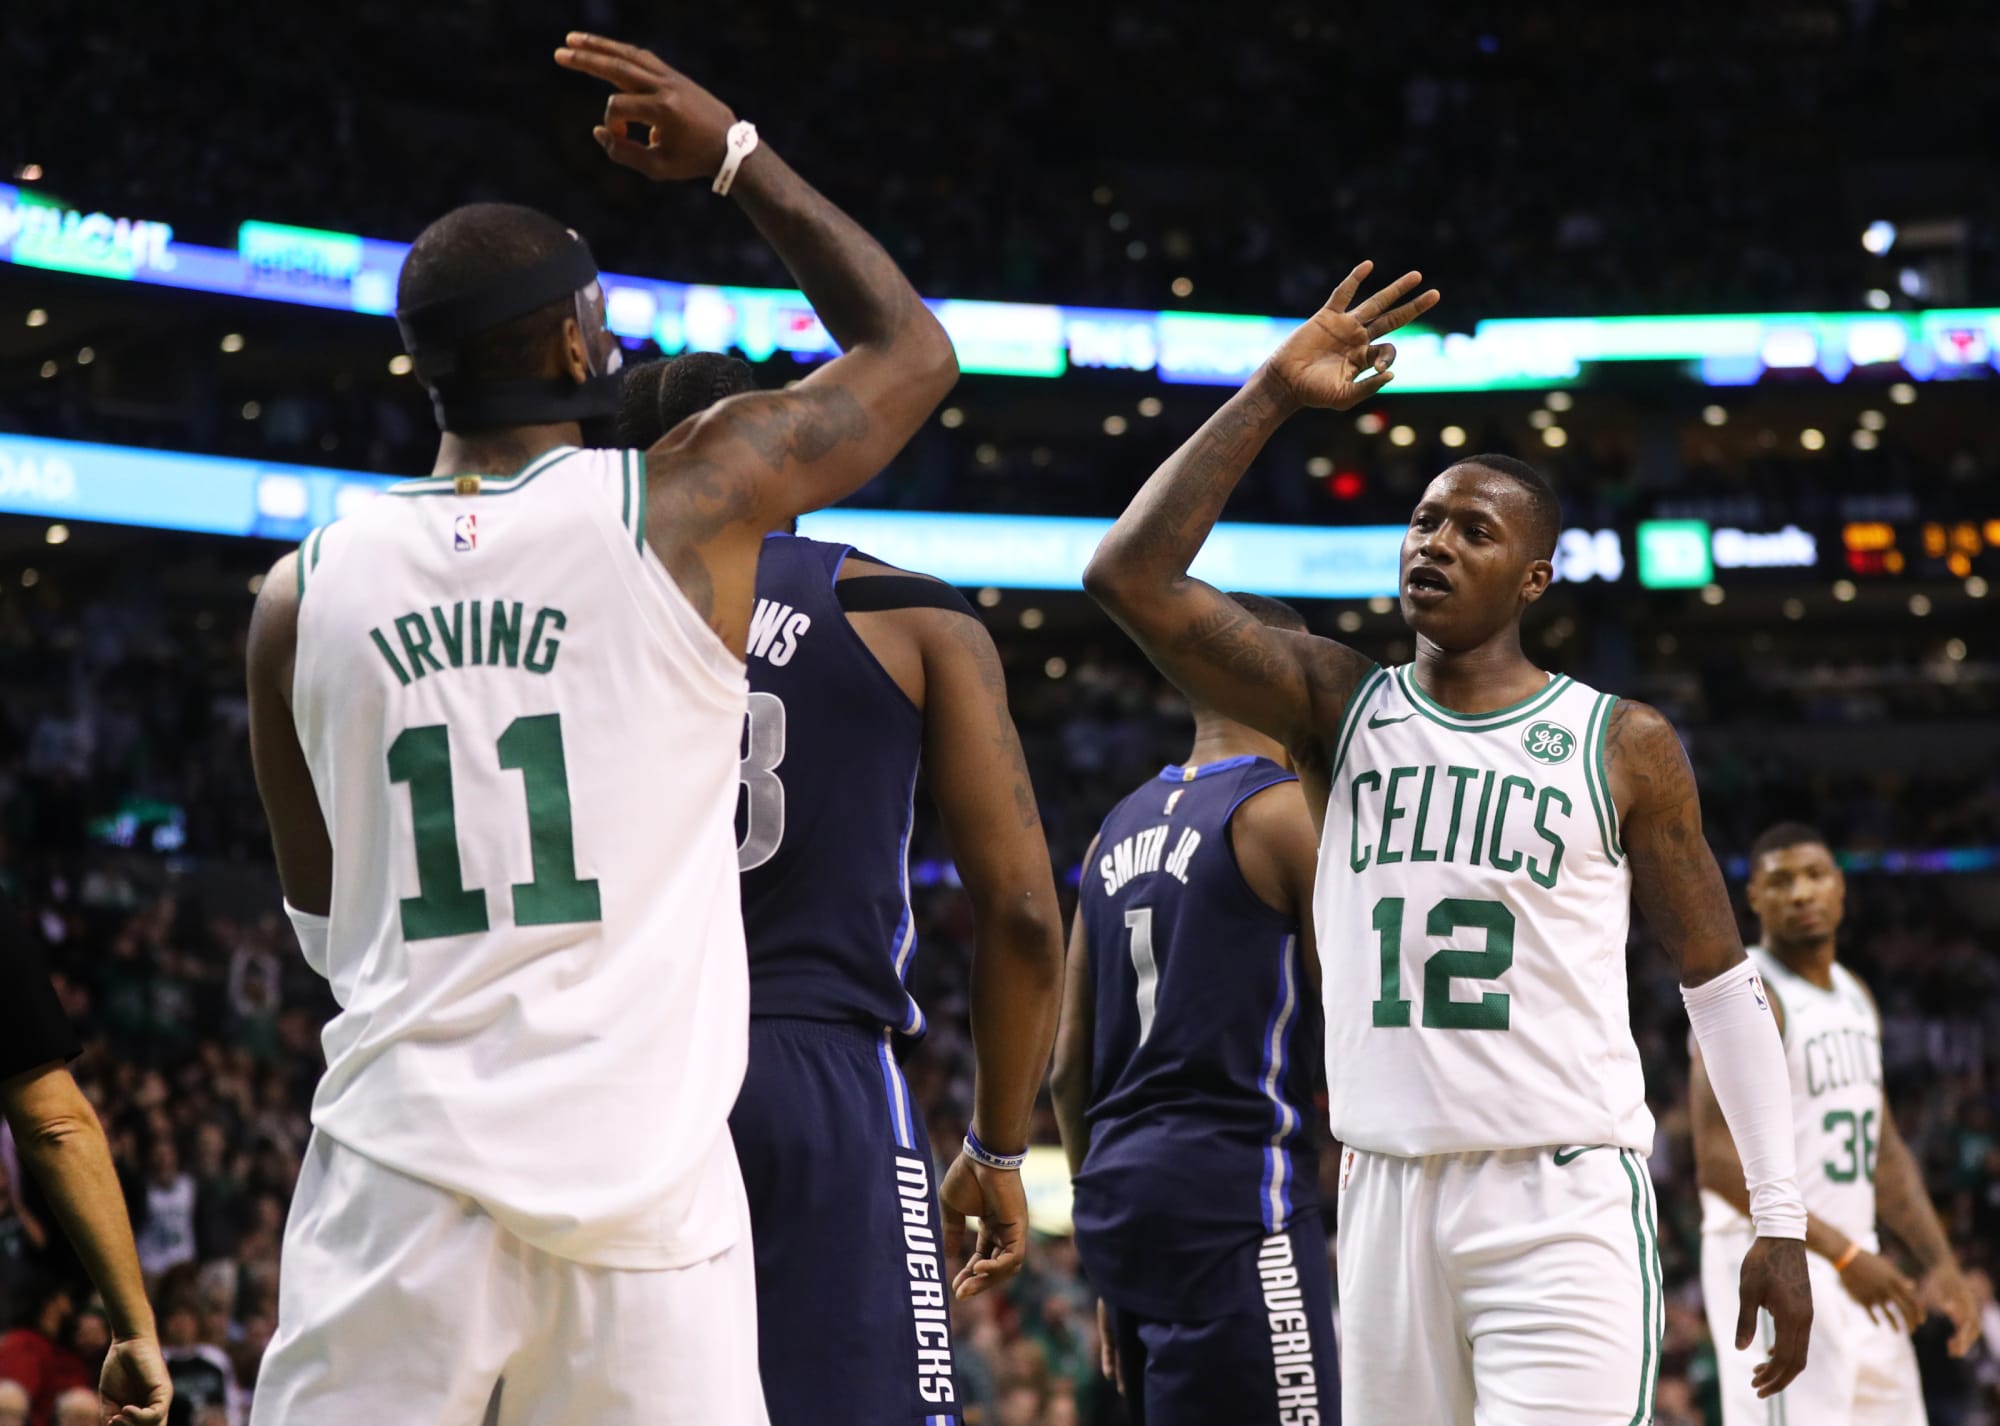 Celtics guard Terry Rozier gets last laugh, shows up to Game 1 in